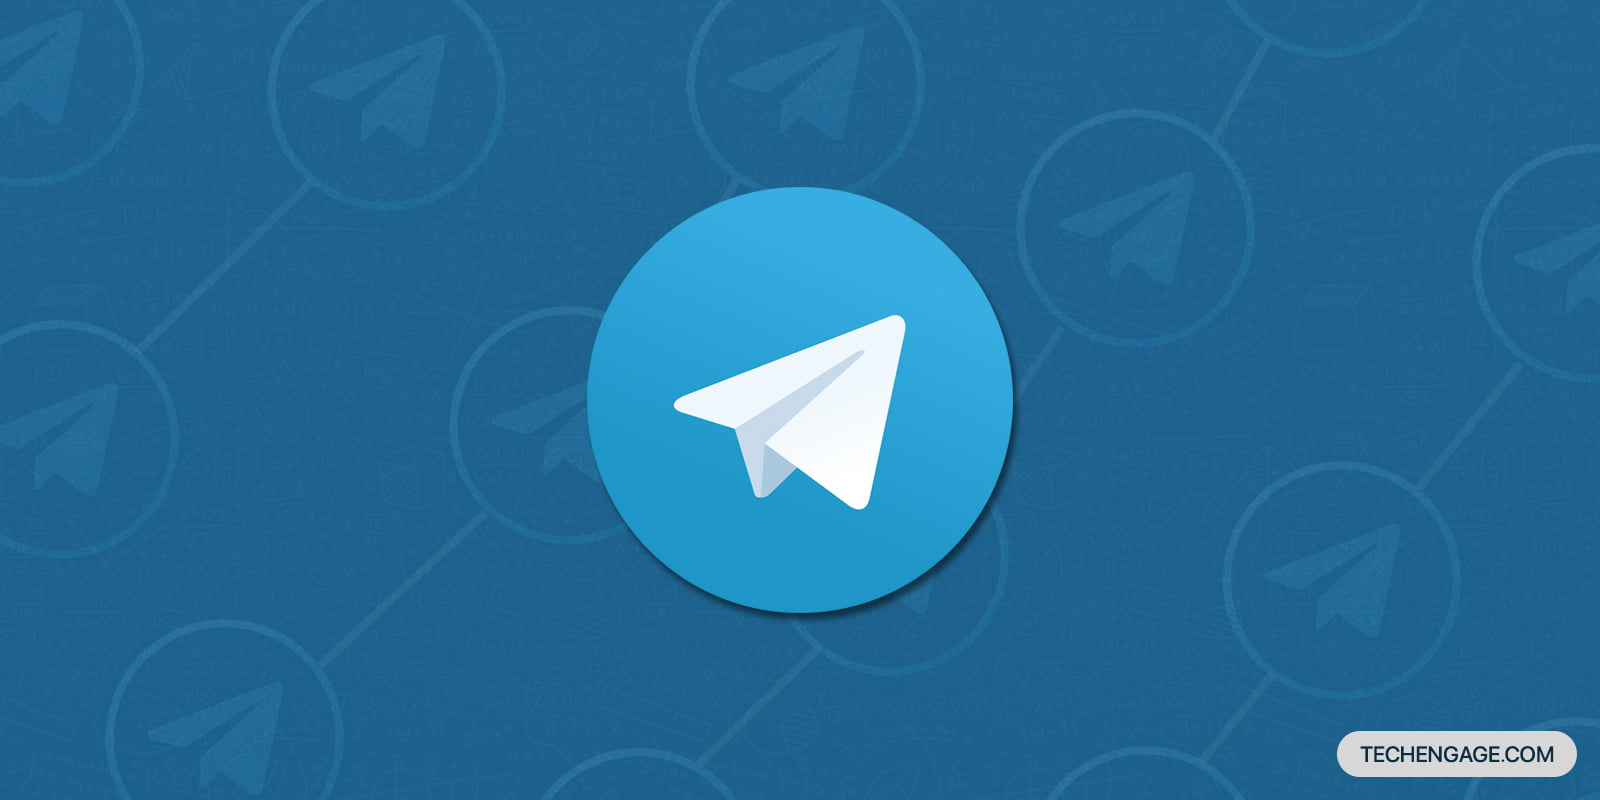 Telegram Introduces Group Video Calls, Screen Sharing, And More Animated Emojis